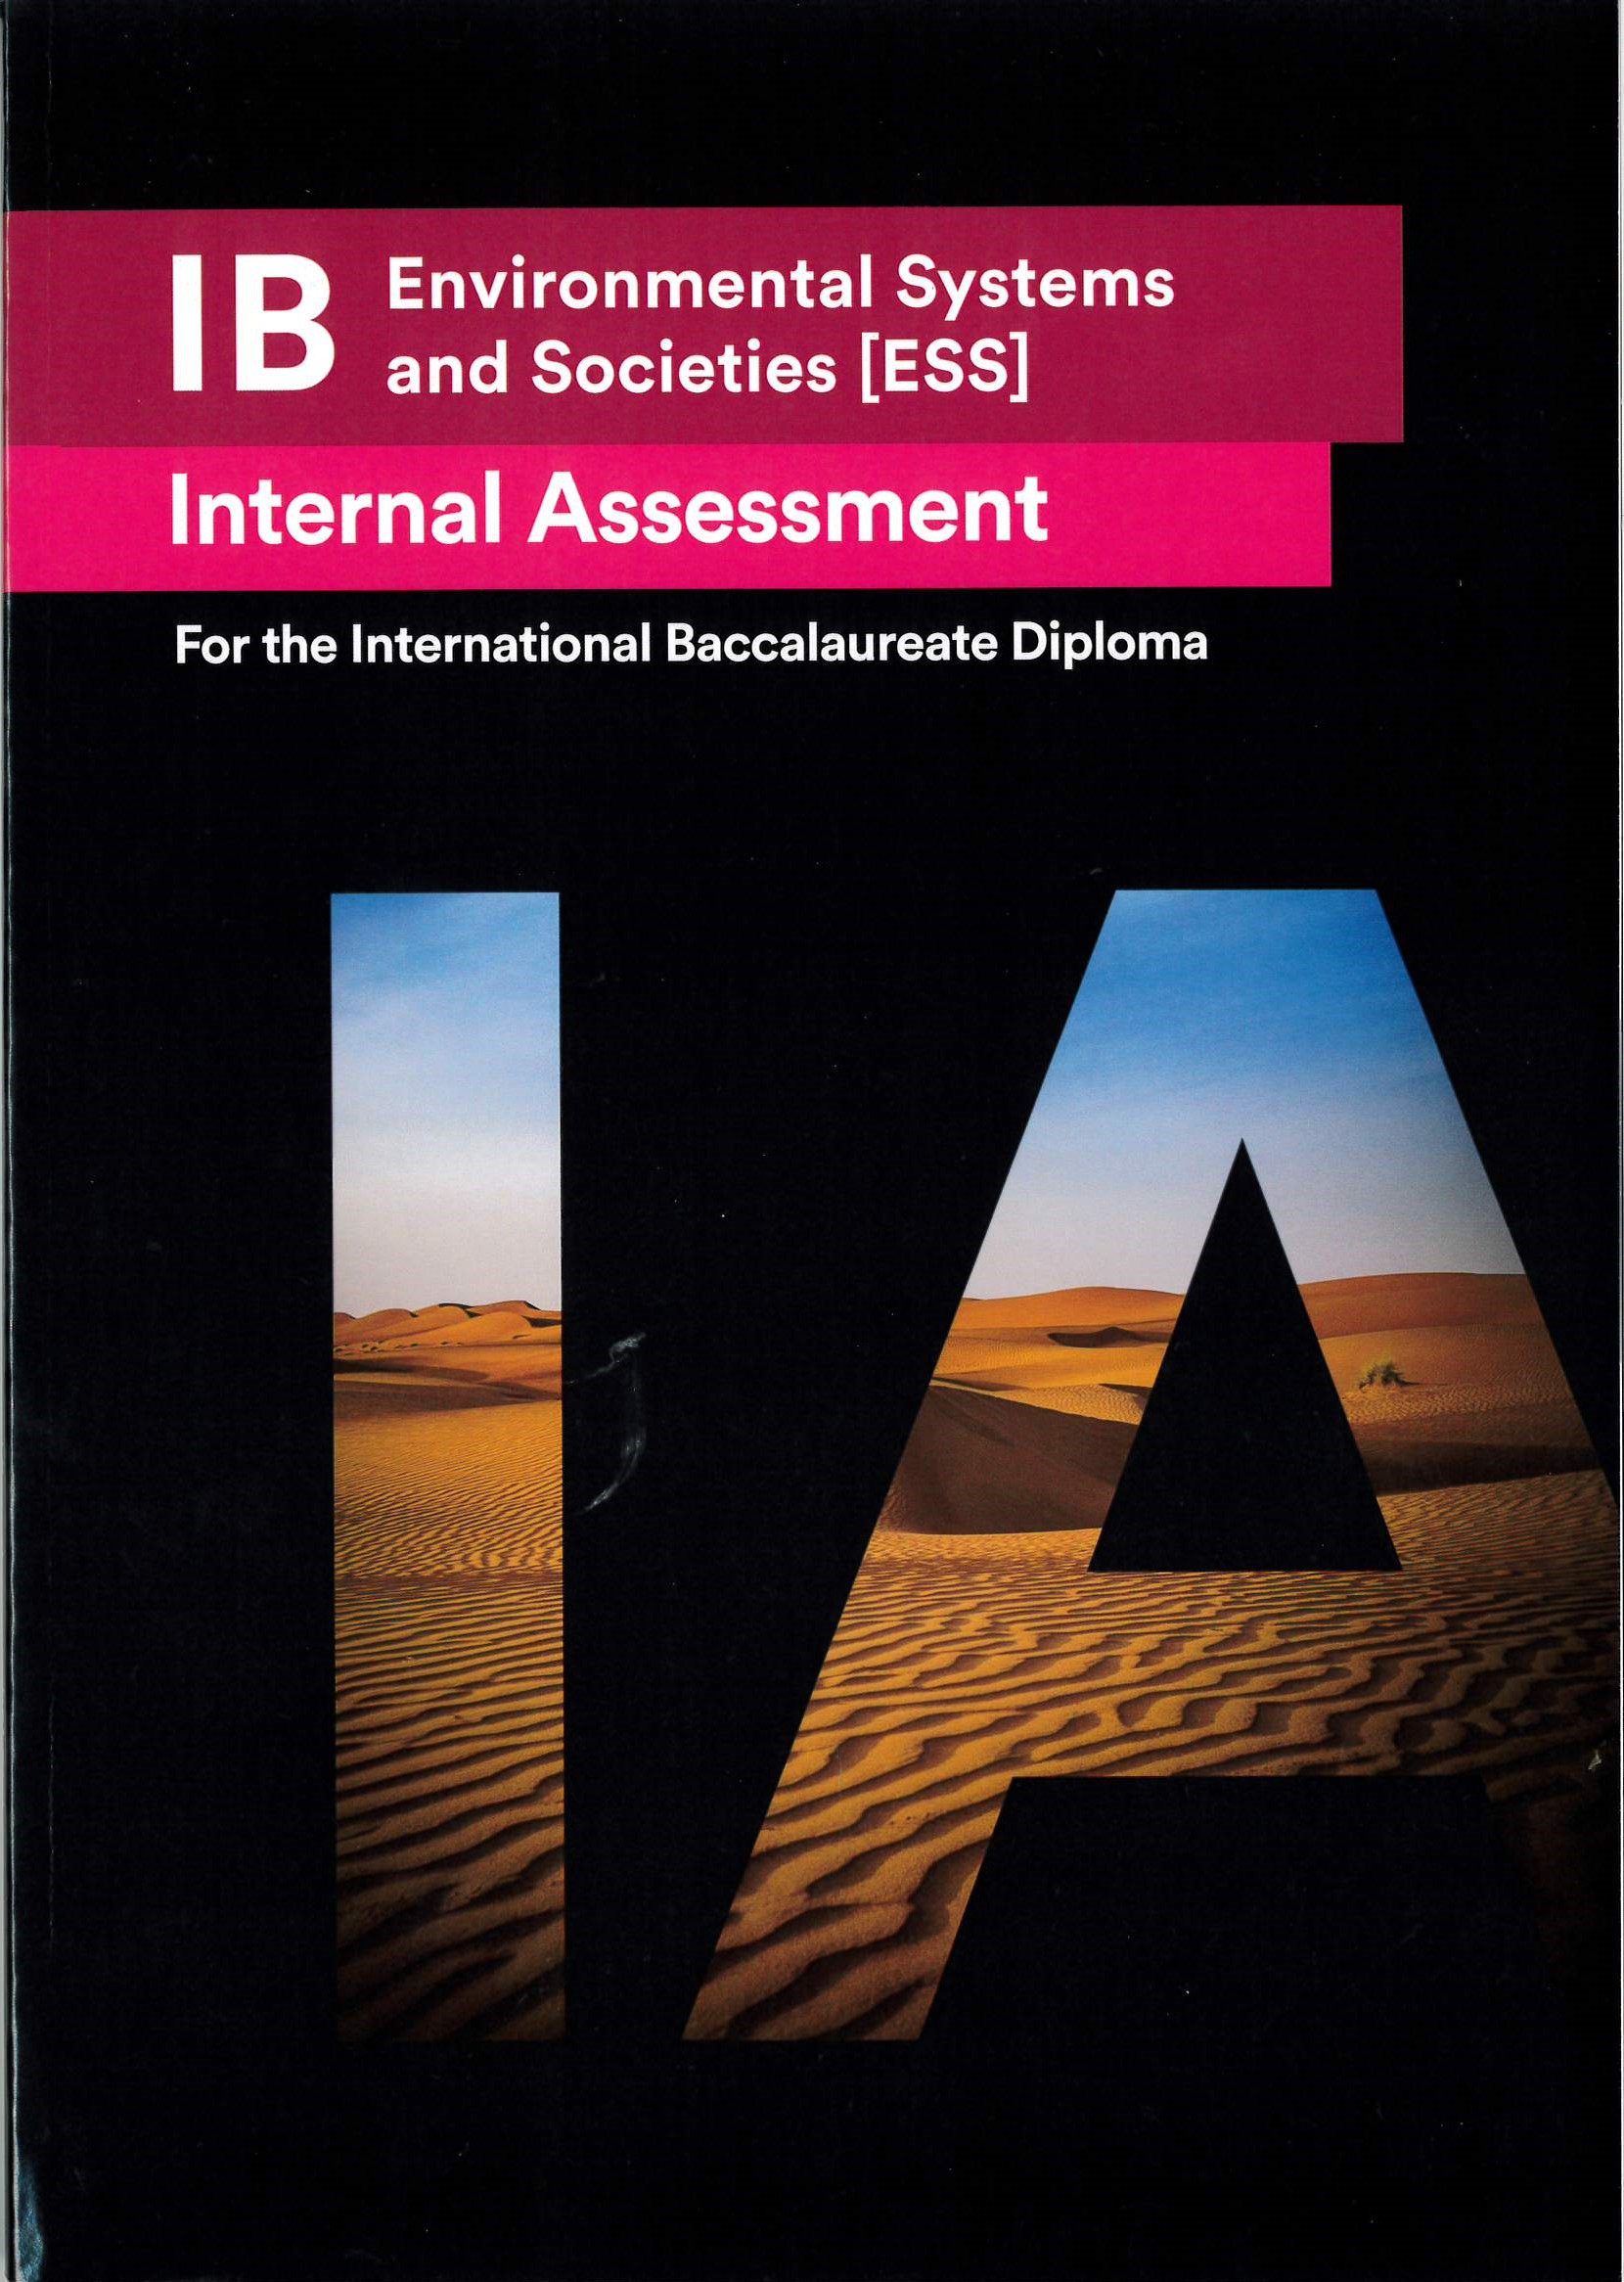 IB environmental systems and societies : internal assessment : for the international baccalaureate diploma